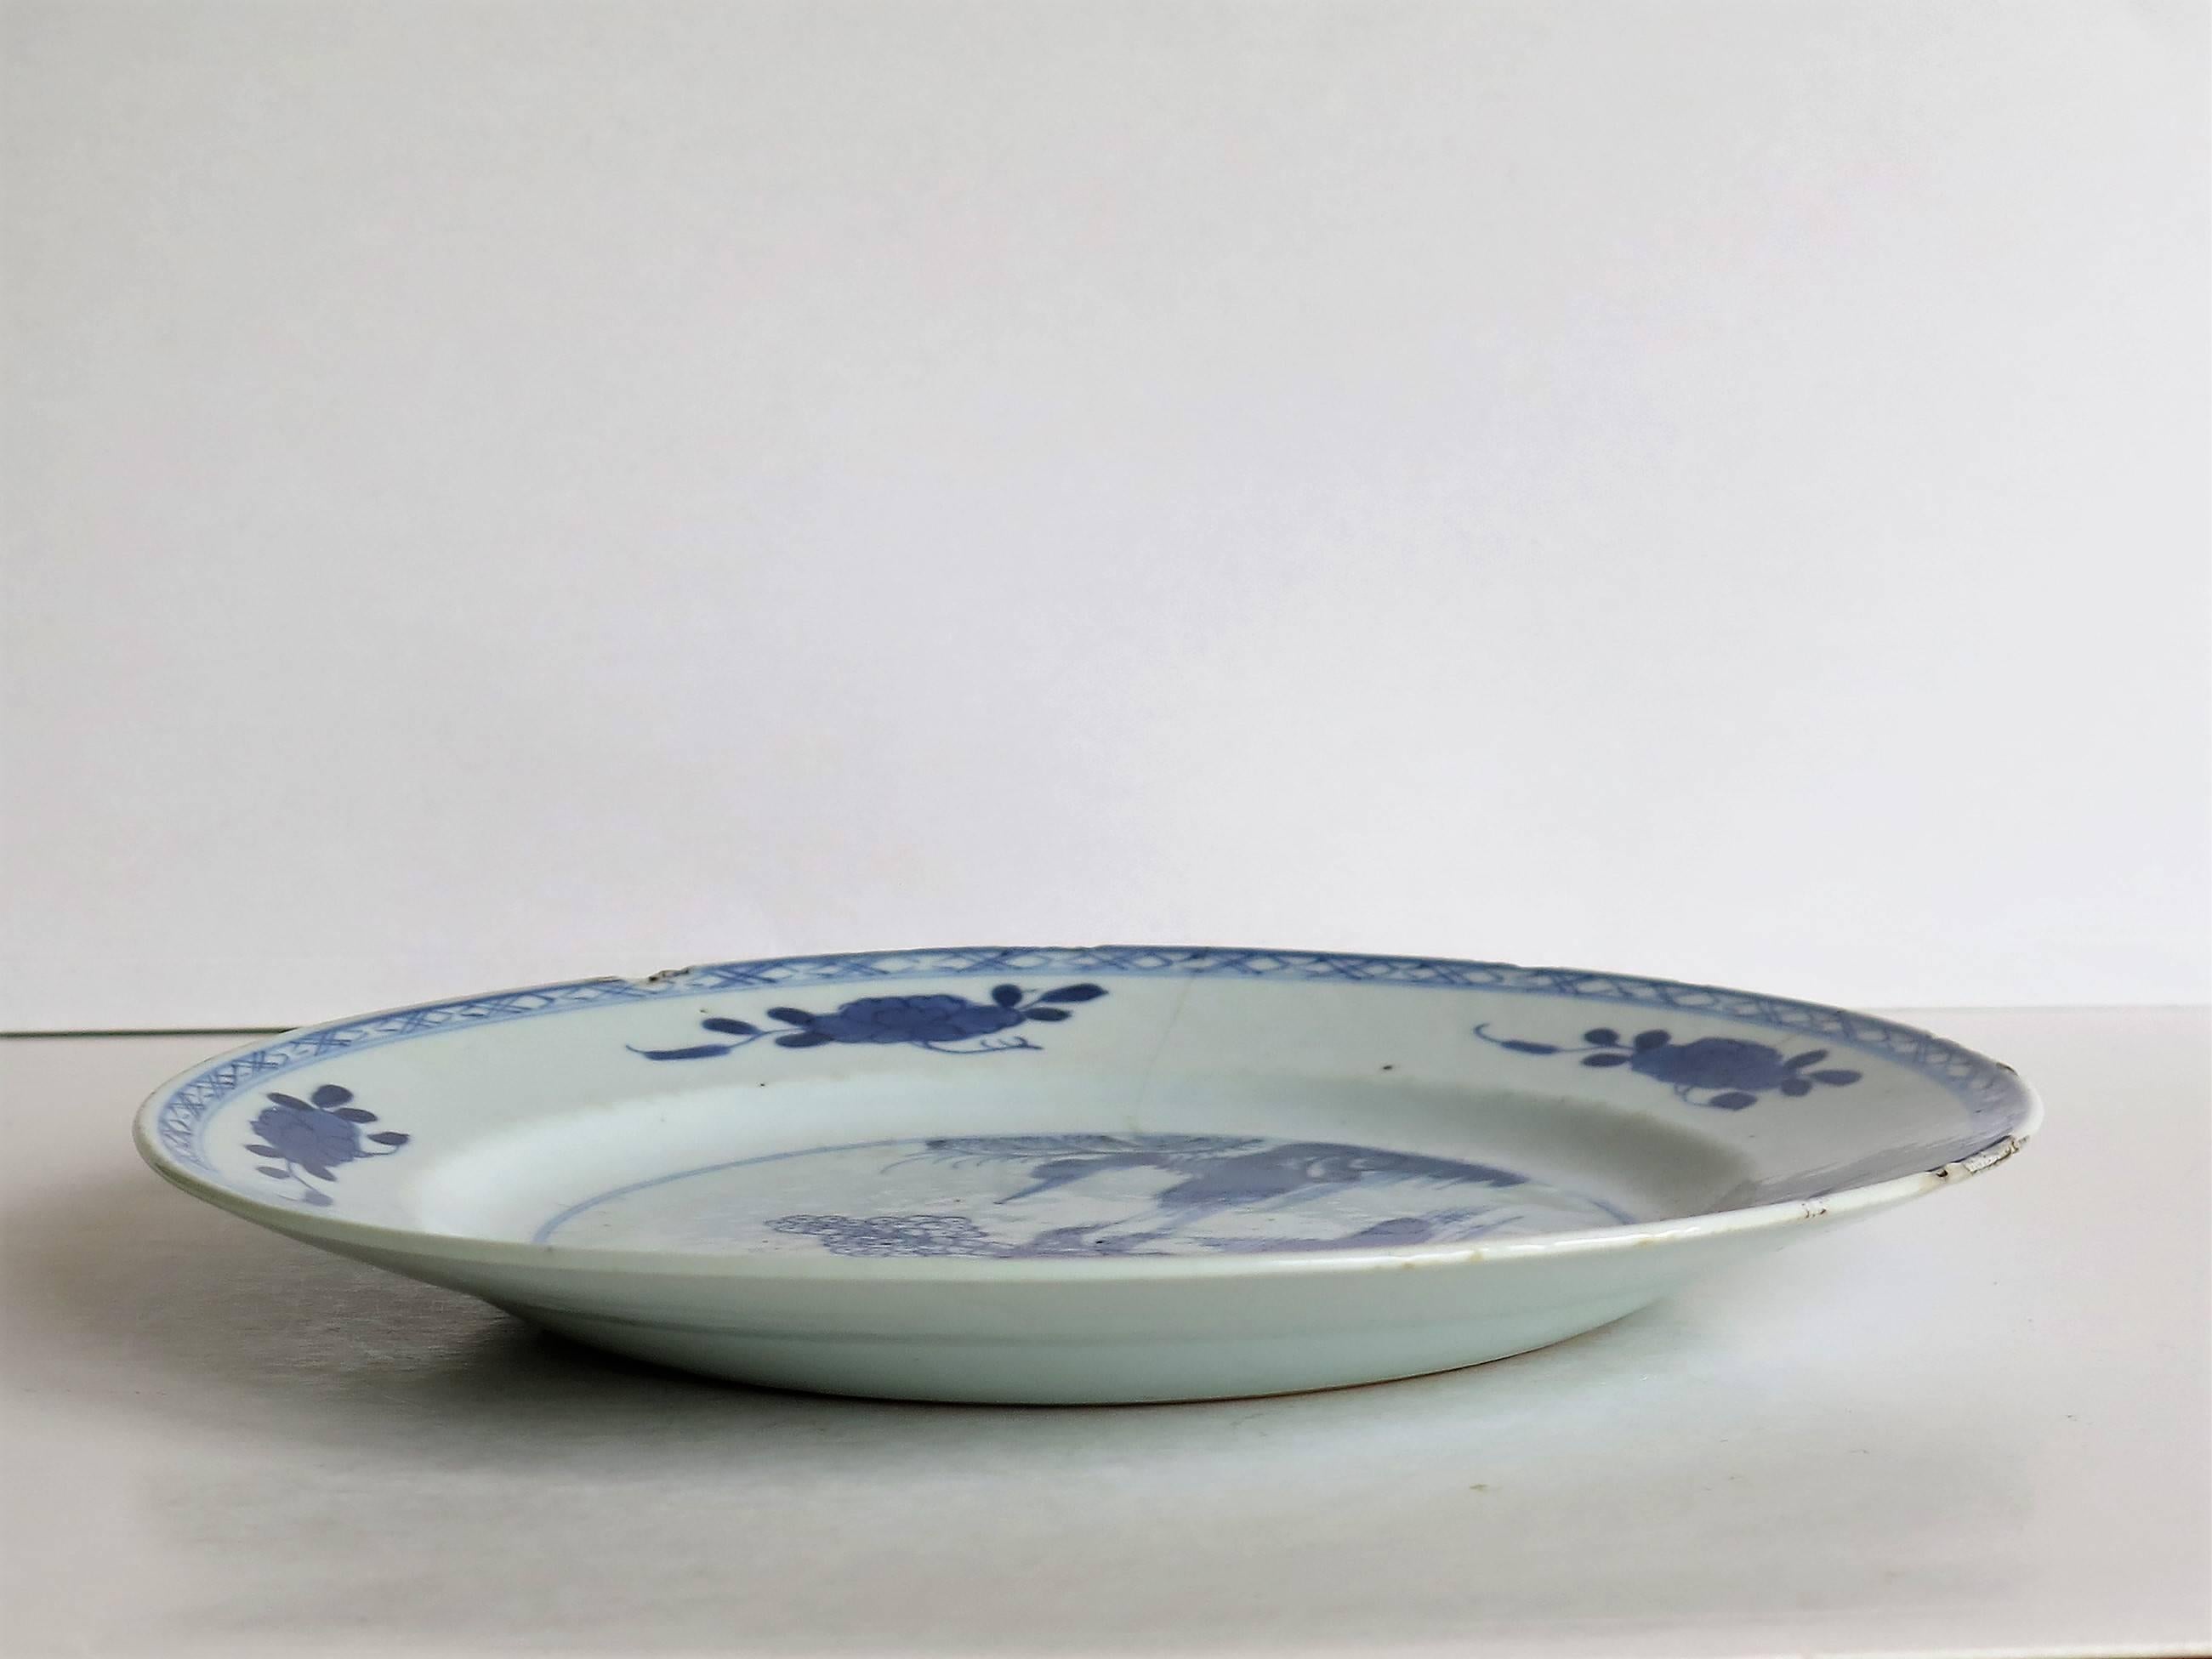 18th Century and Earlier 18th Century Chinese Plate, Blue and White Porcelain, Pagoda Lake Scene